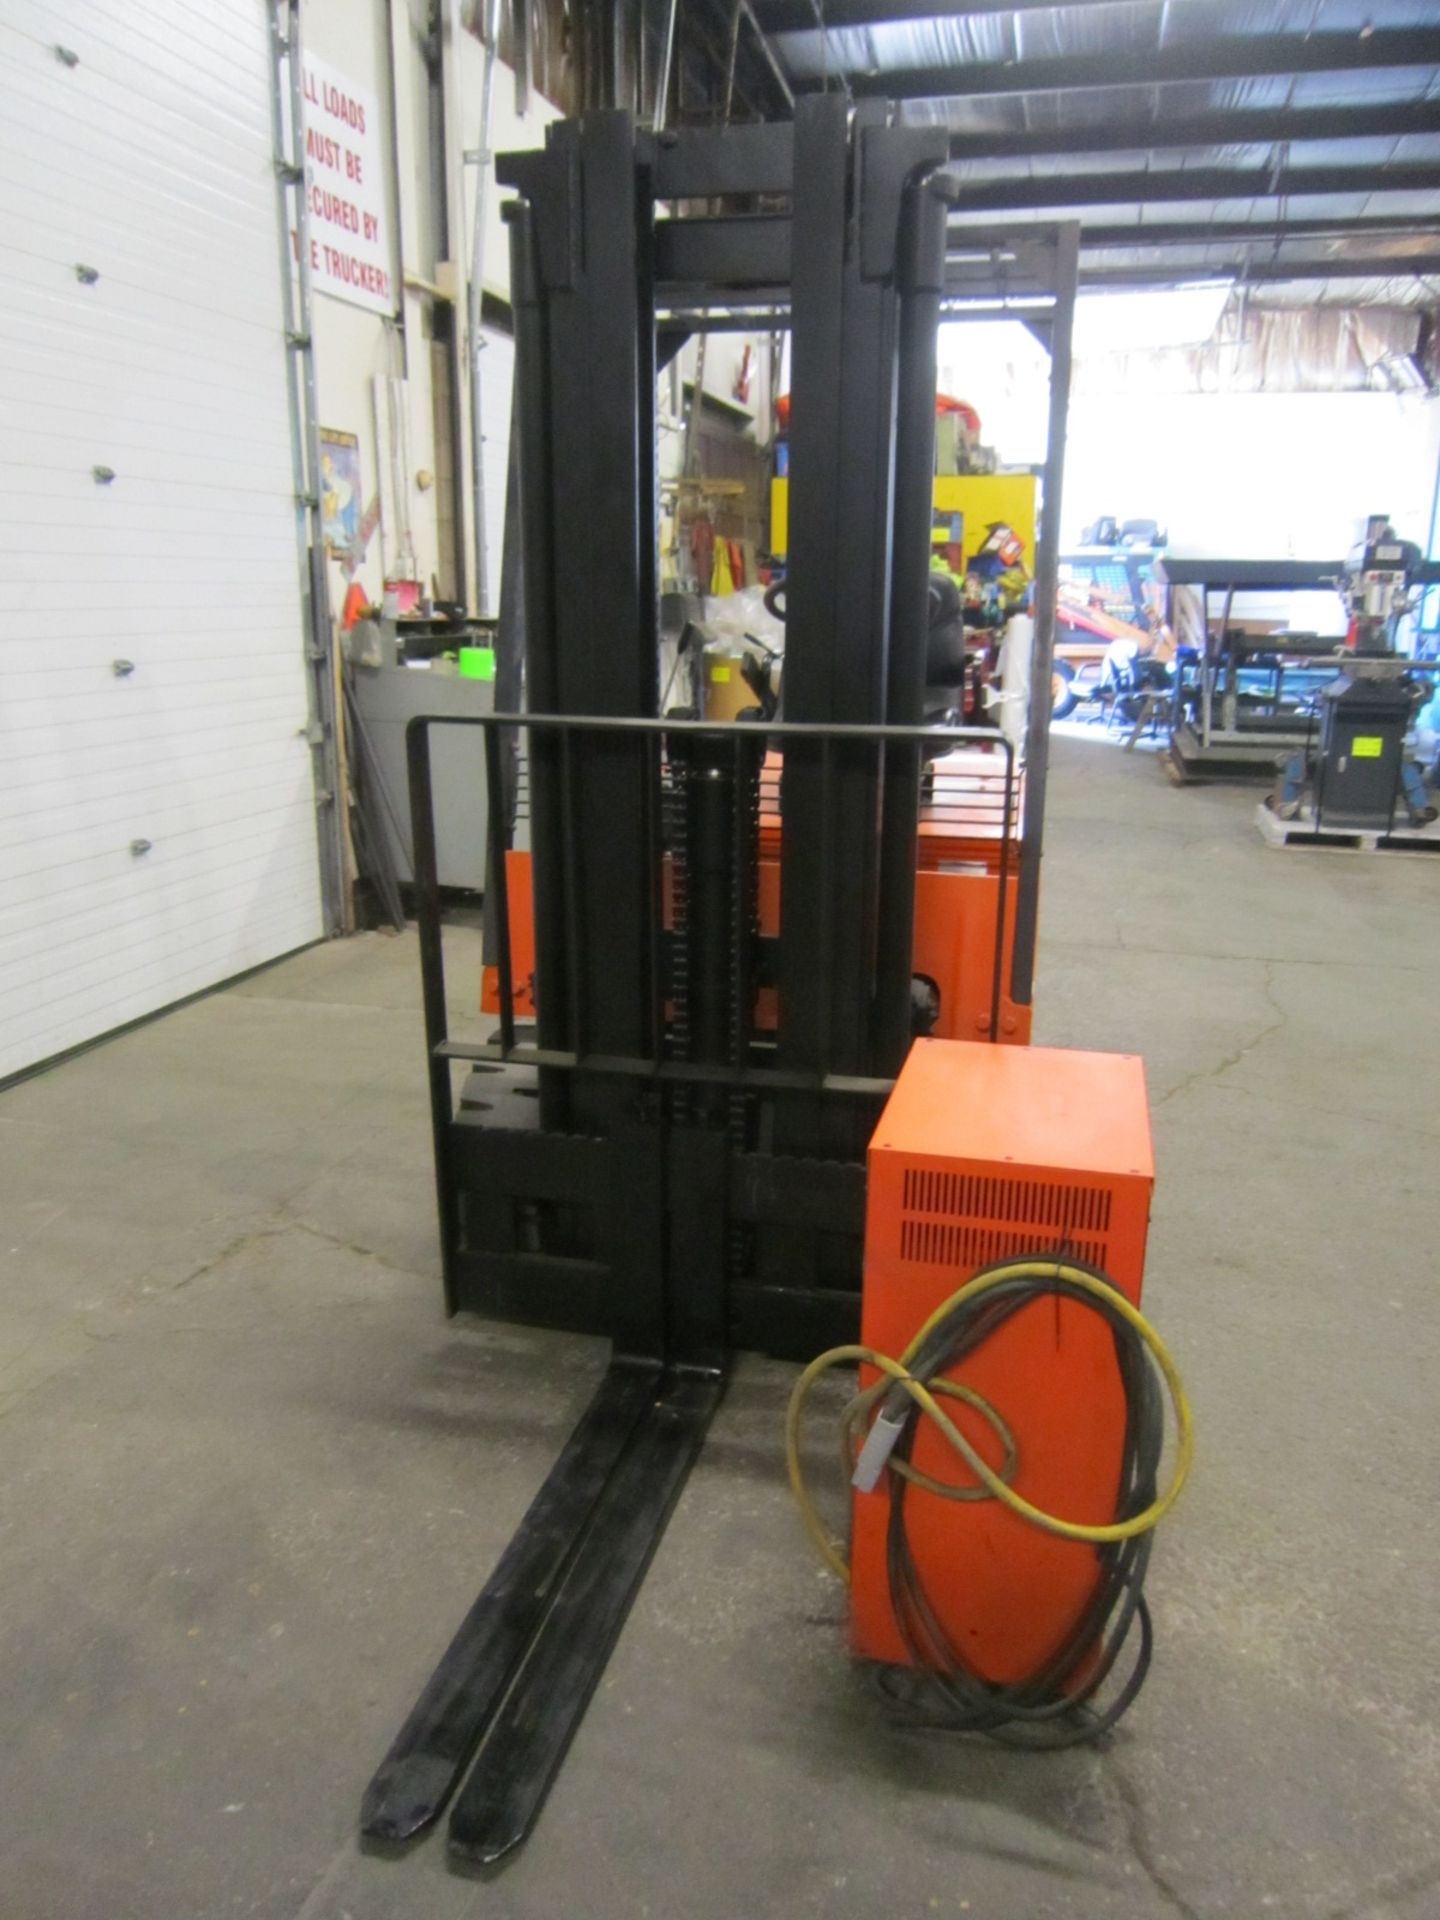 2008 Mitsubishi Diamond Electric Forklift 4000lbs Capacity with 3-stage mast - MINT UNIT only 4 - Image 2 of 3